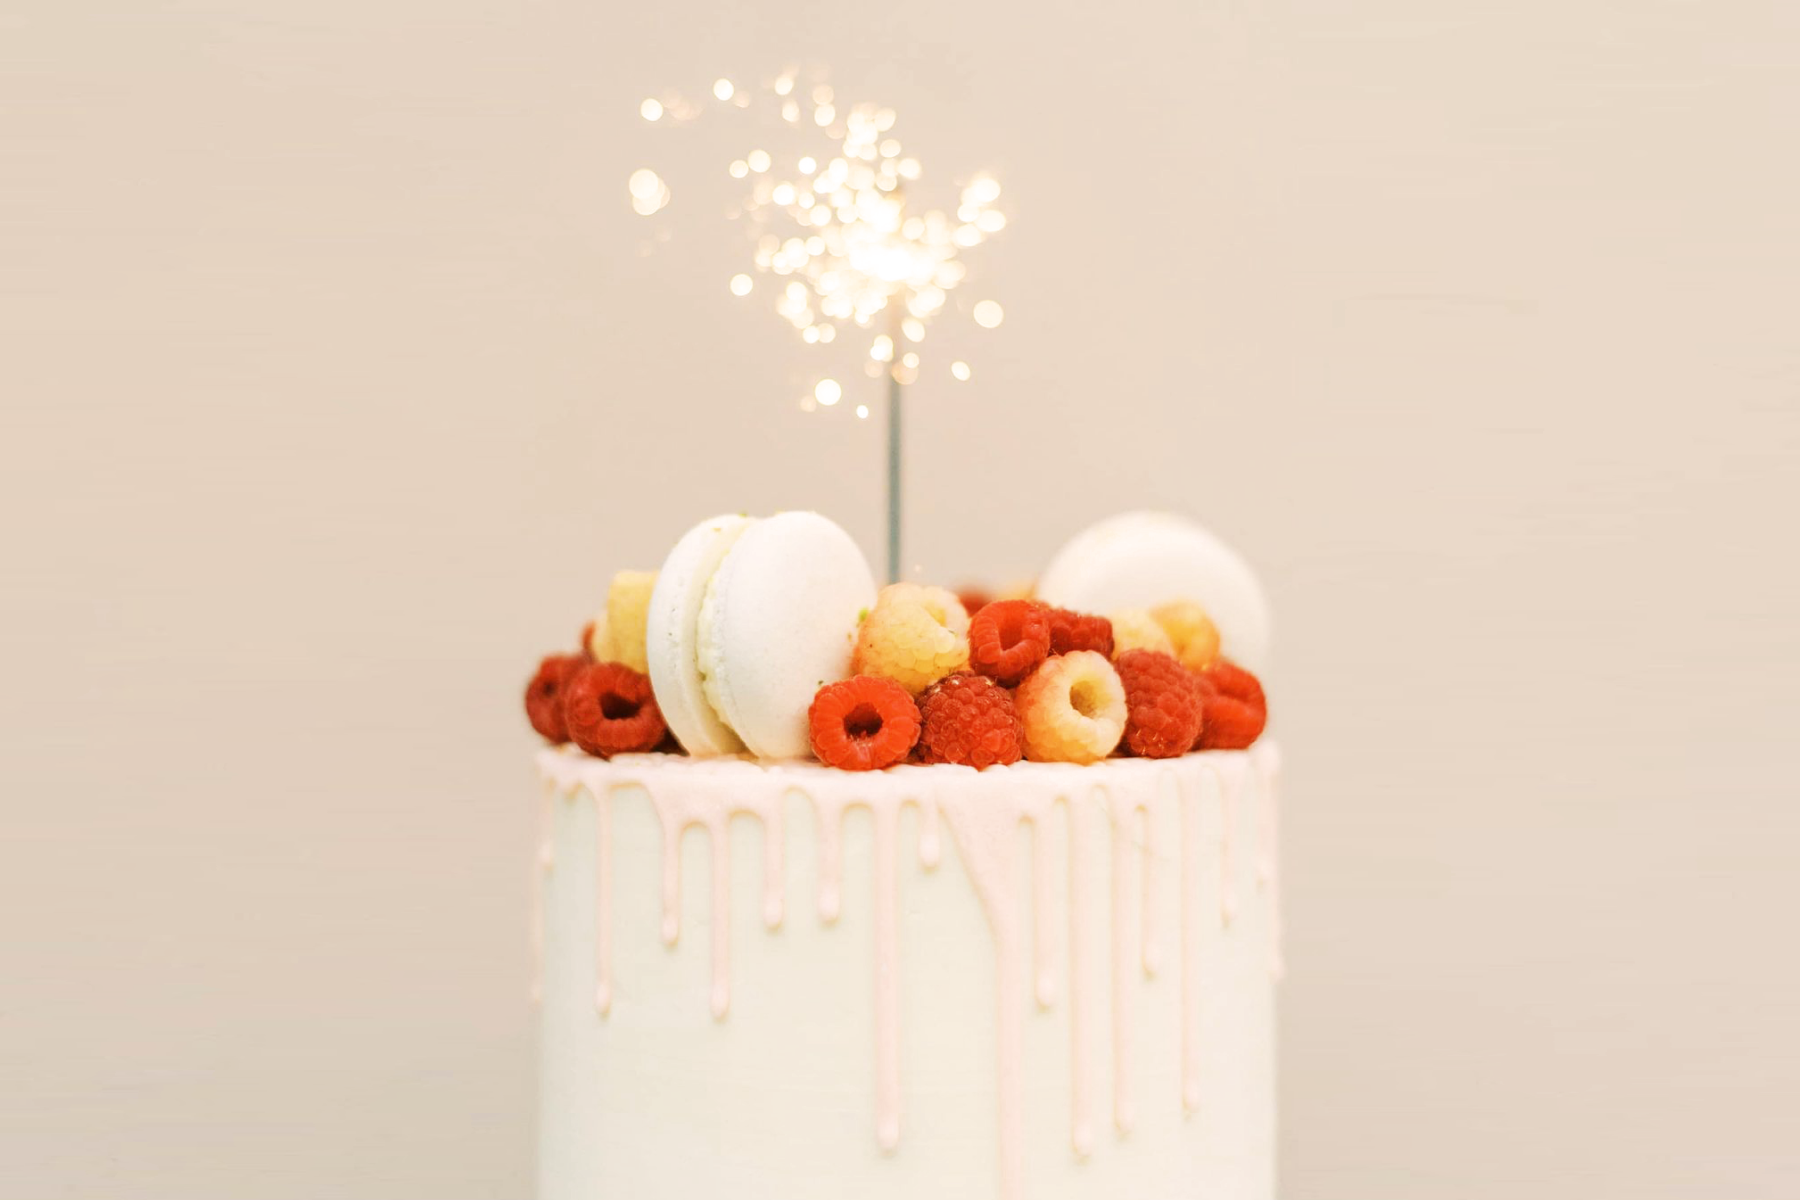 A cream-colored birthday cake with macarons, raspberries, and a sparkler candle.